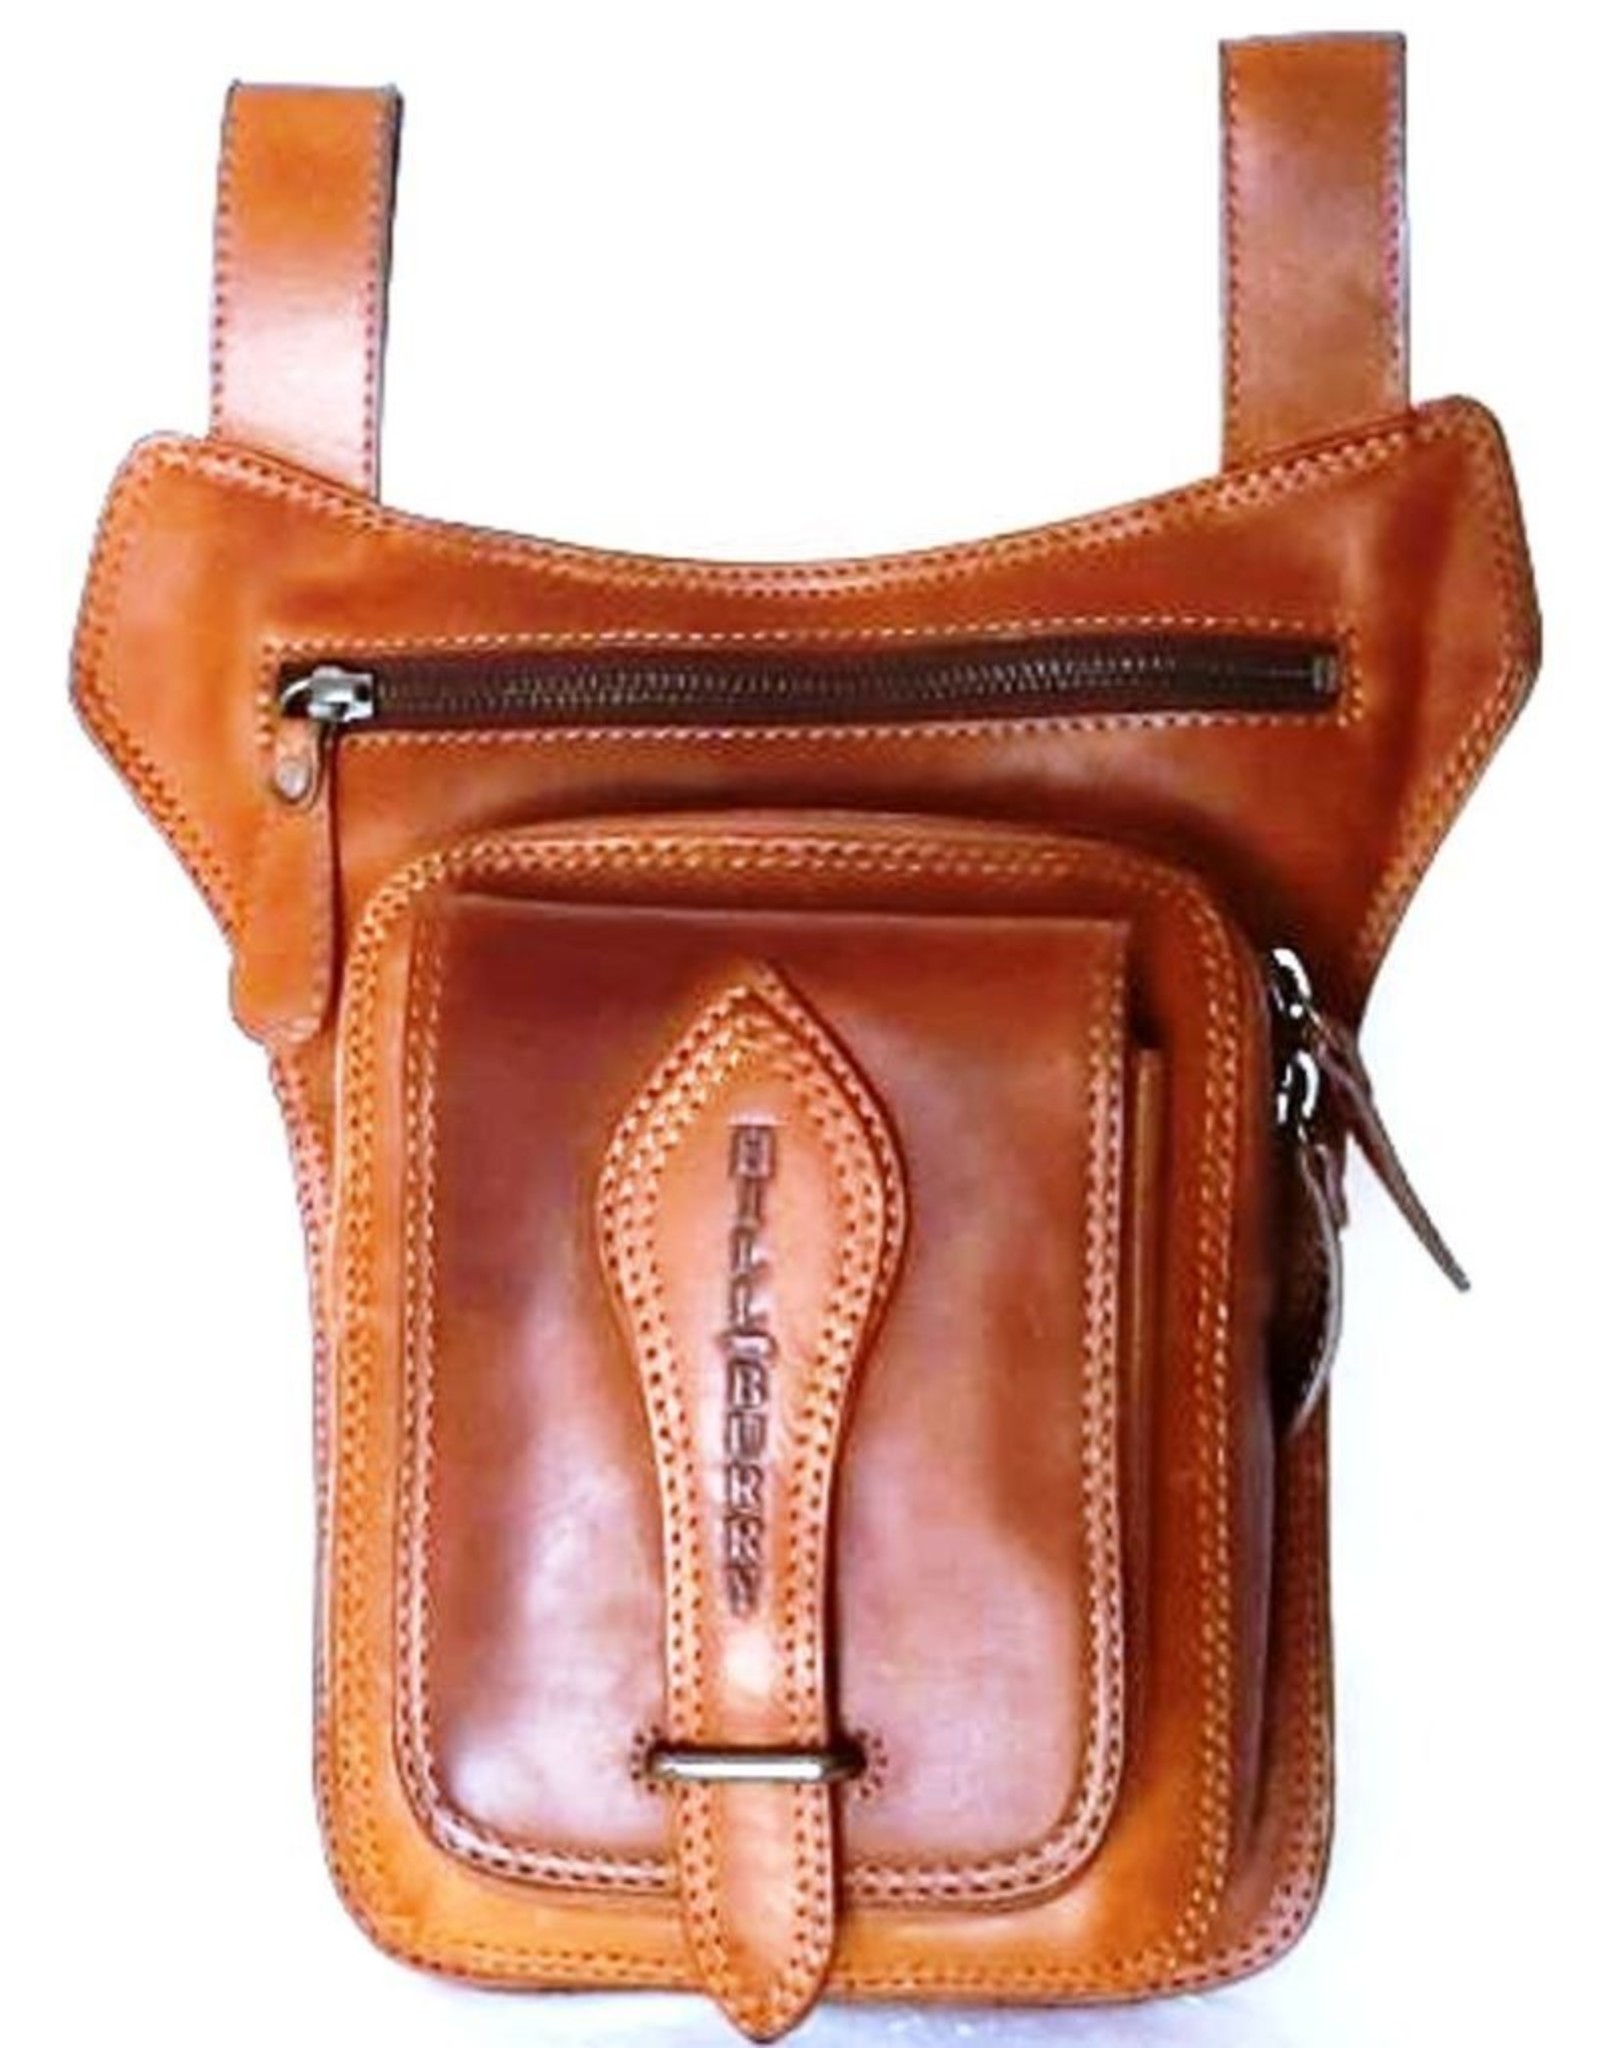 HillBurry Leather Festival bags, waist bags and belt bags - Hillburry belt bag - leg bag oiled leather brown